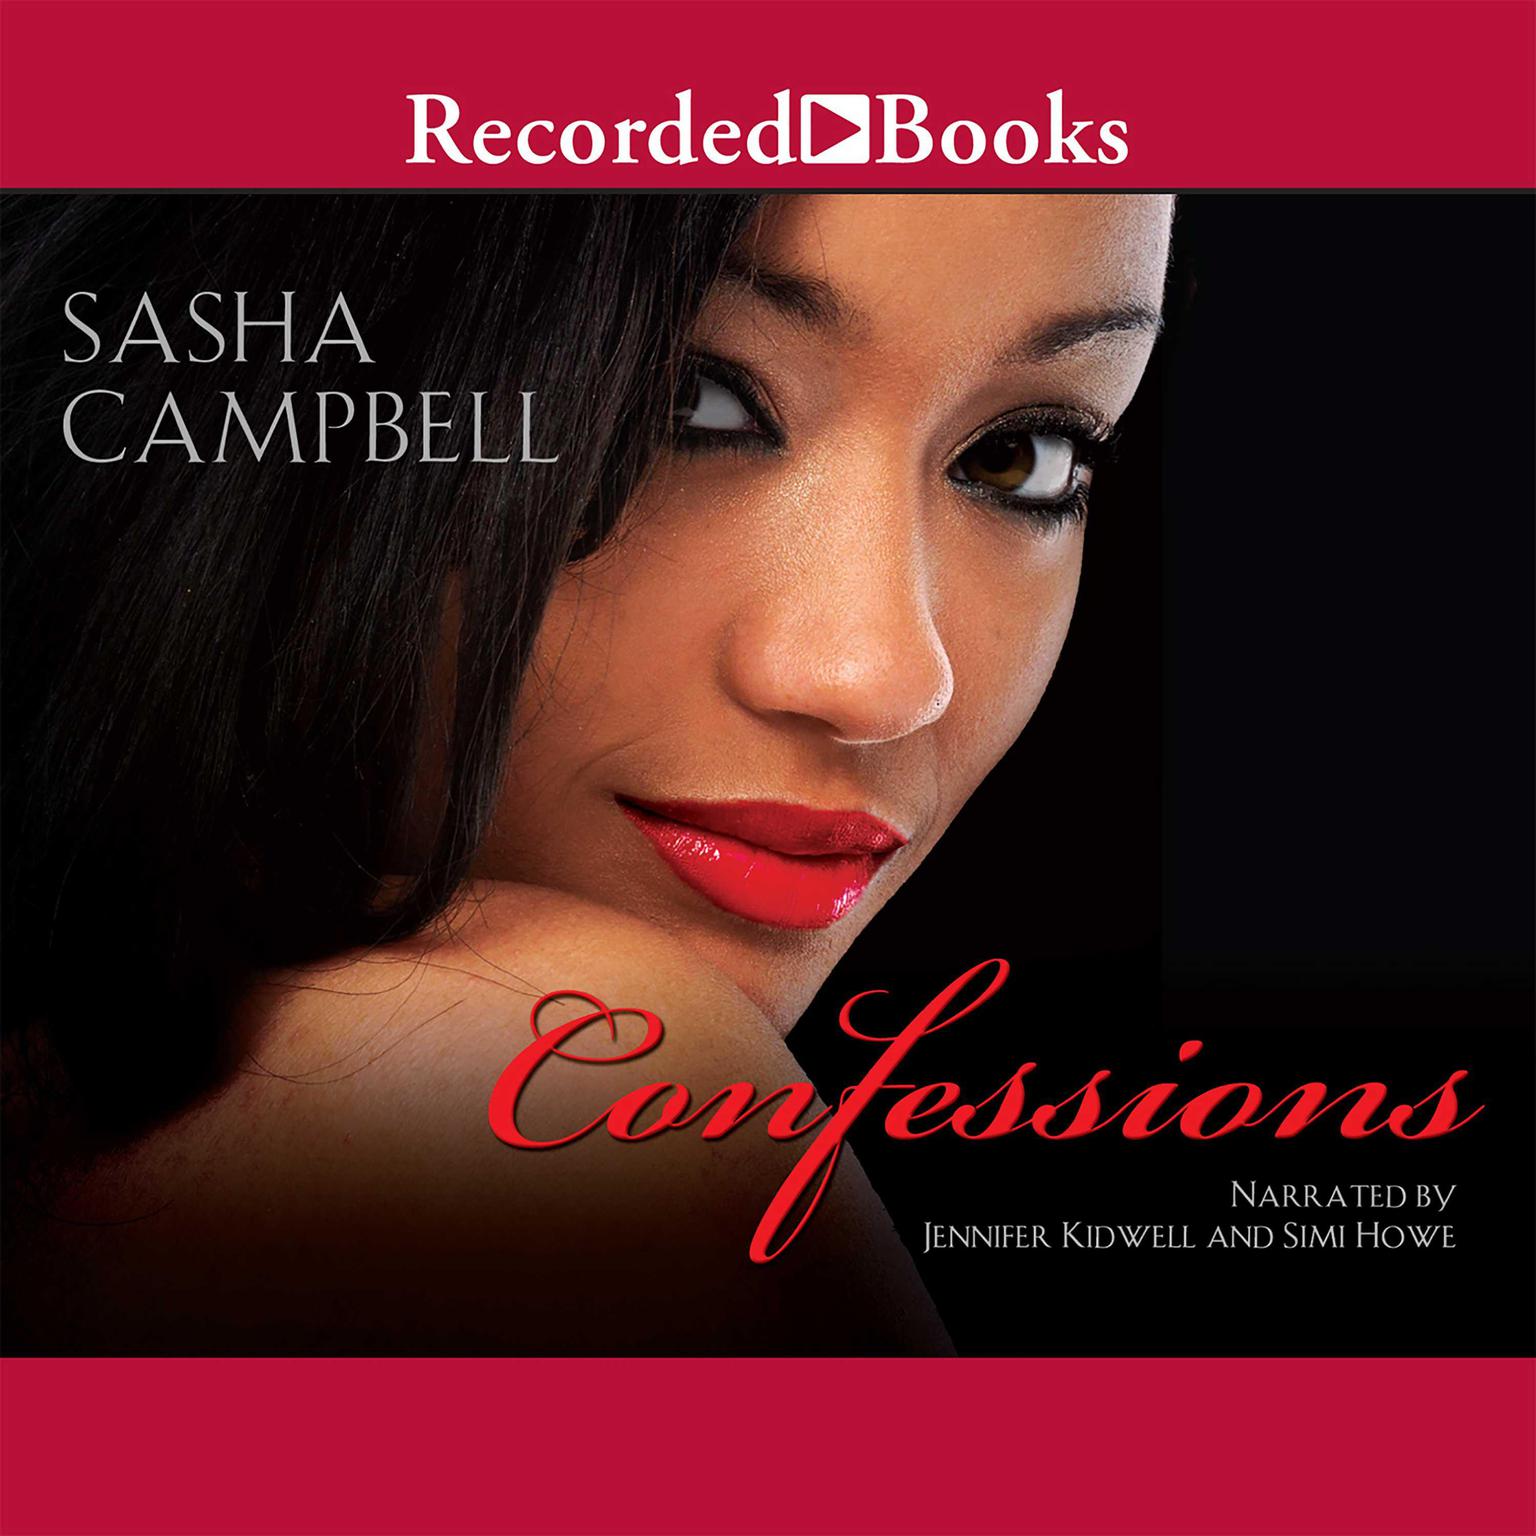 Confessions Audiobook, by Sasha Campbell